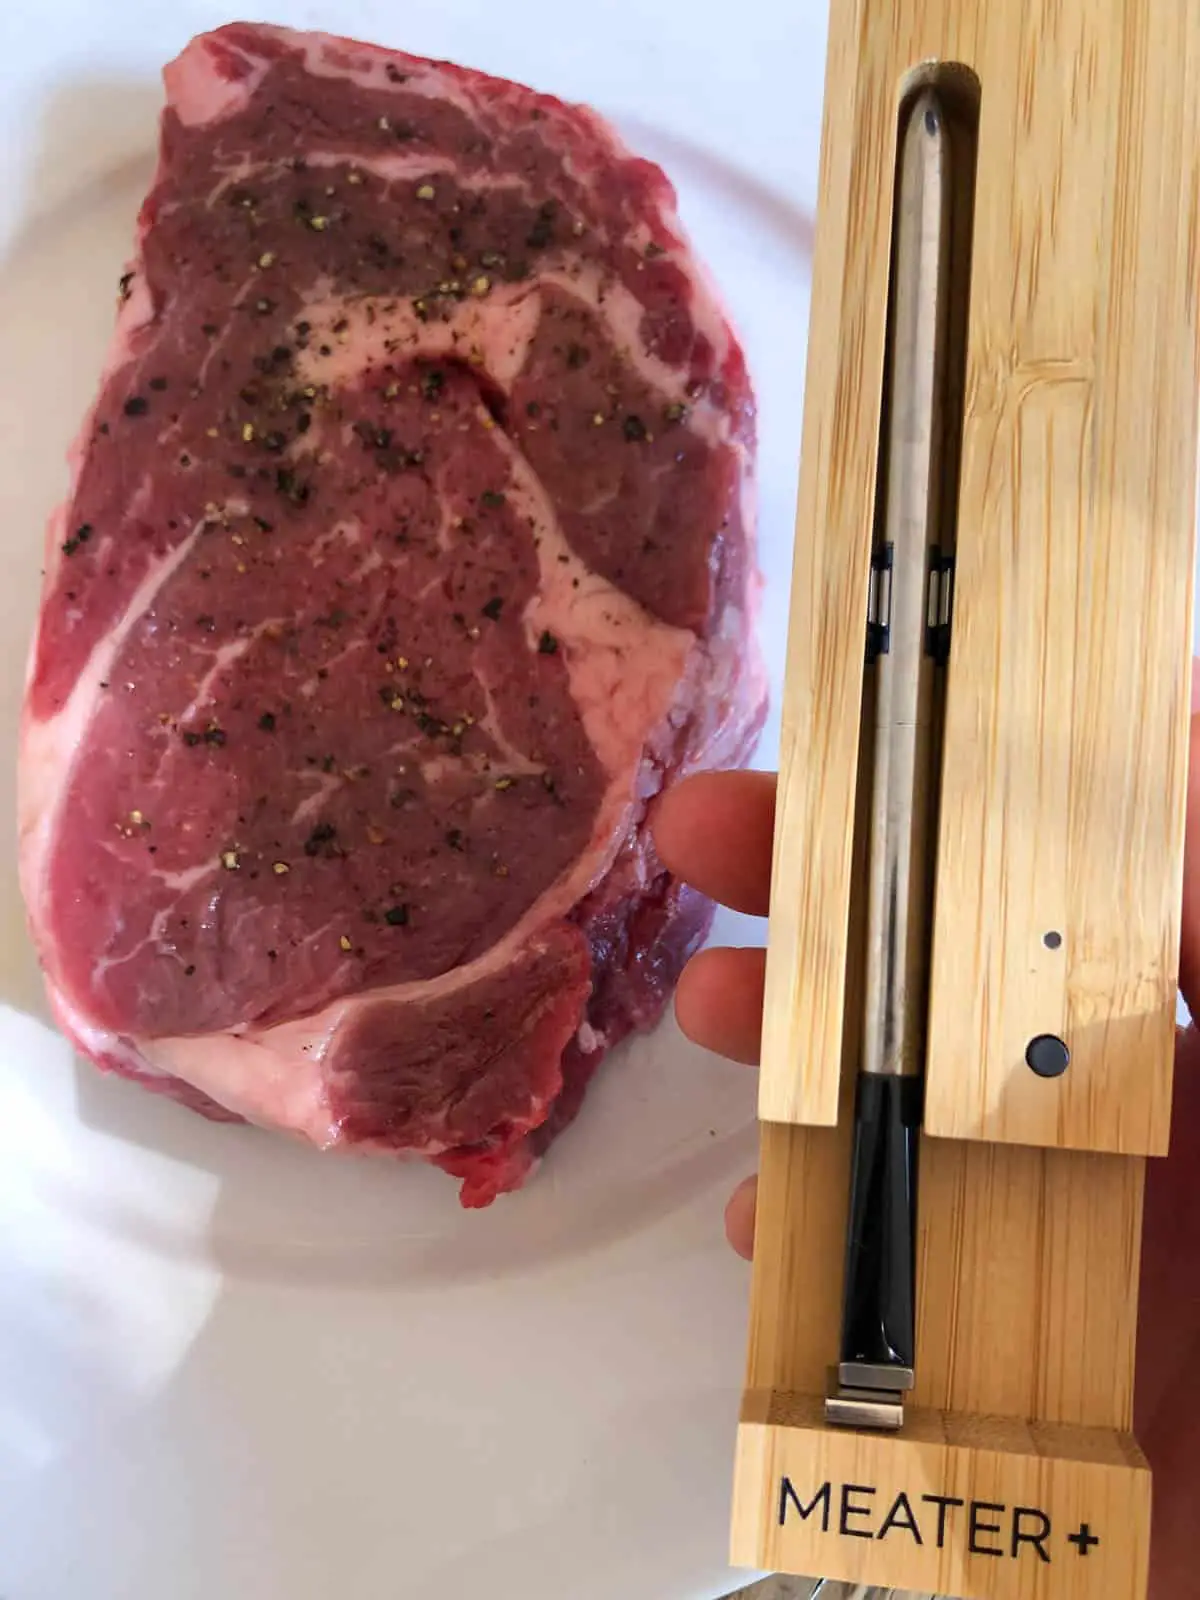 A ribeye steak on a white plate in the background and a hand holding a Meater thermometer in the foreground.